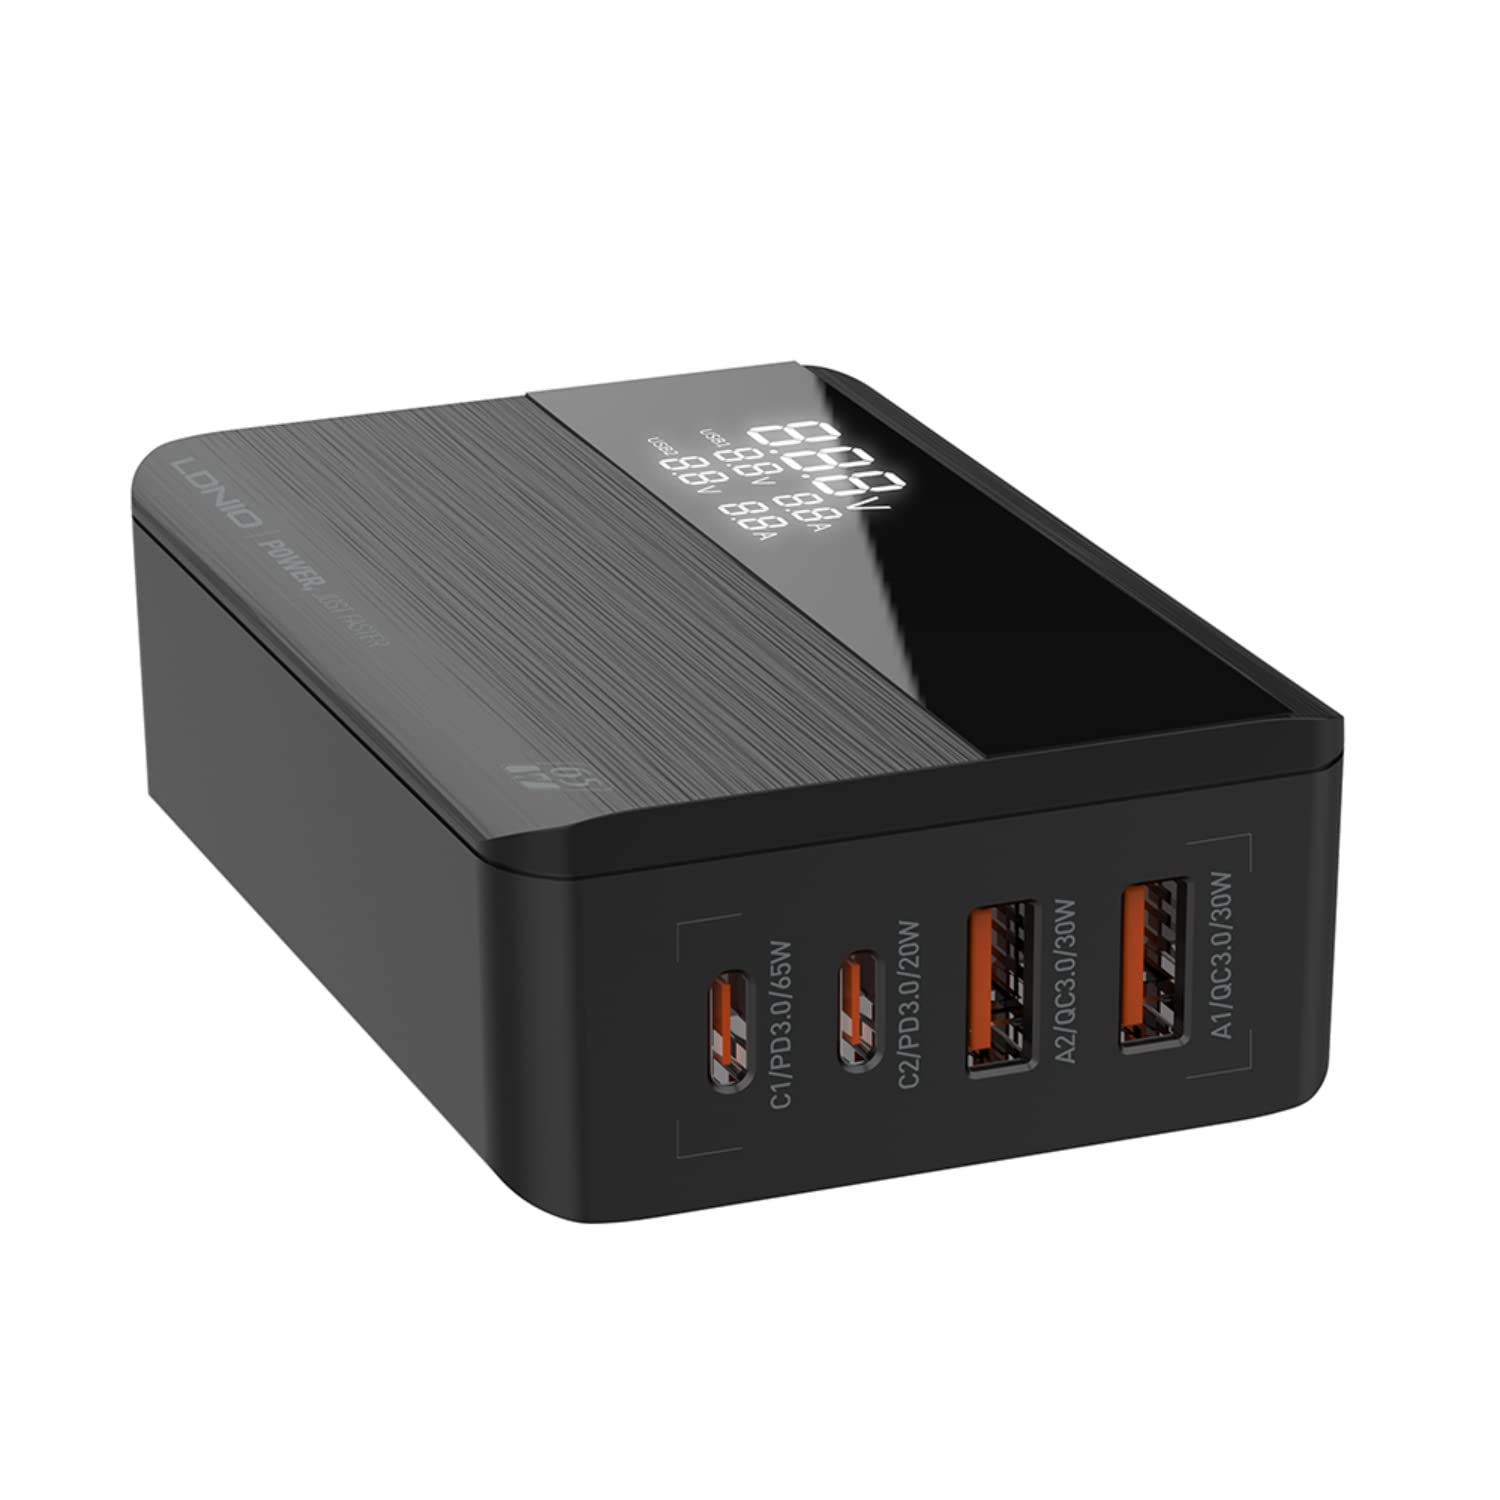 LDNIO 65W PD Super Fast Charger Black with LED Display 4 Port USB Desktop Adapter Universal Mobile Phone Charger